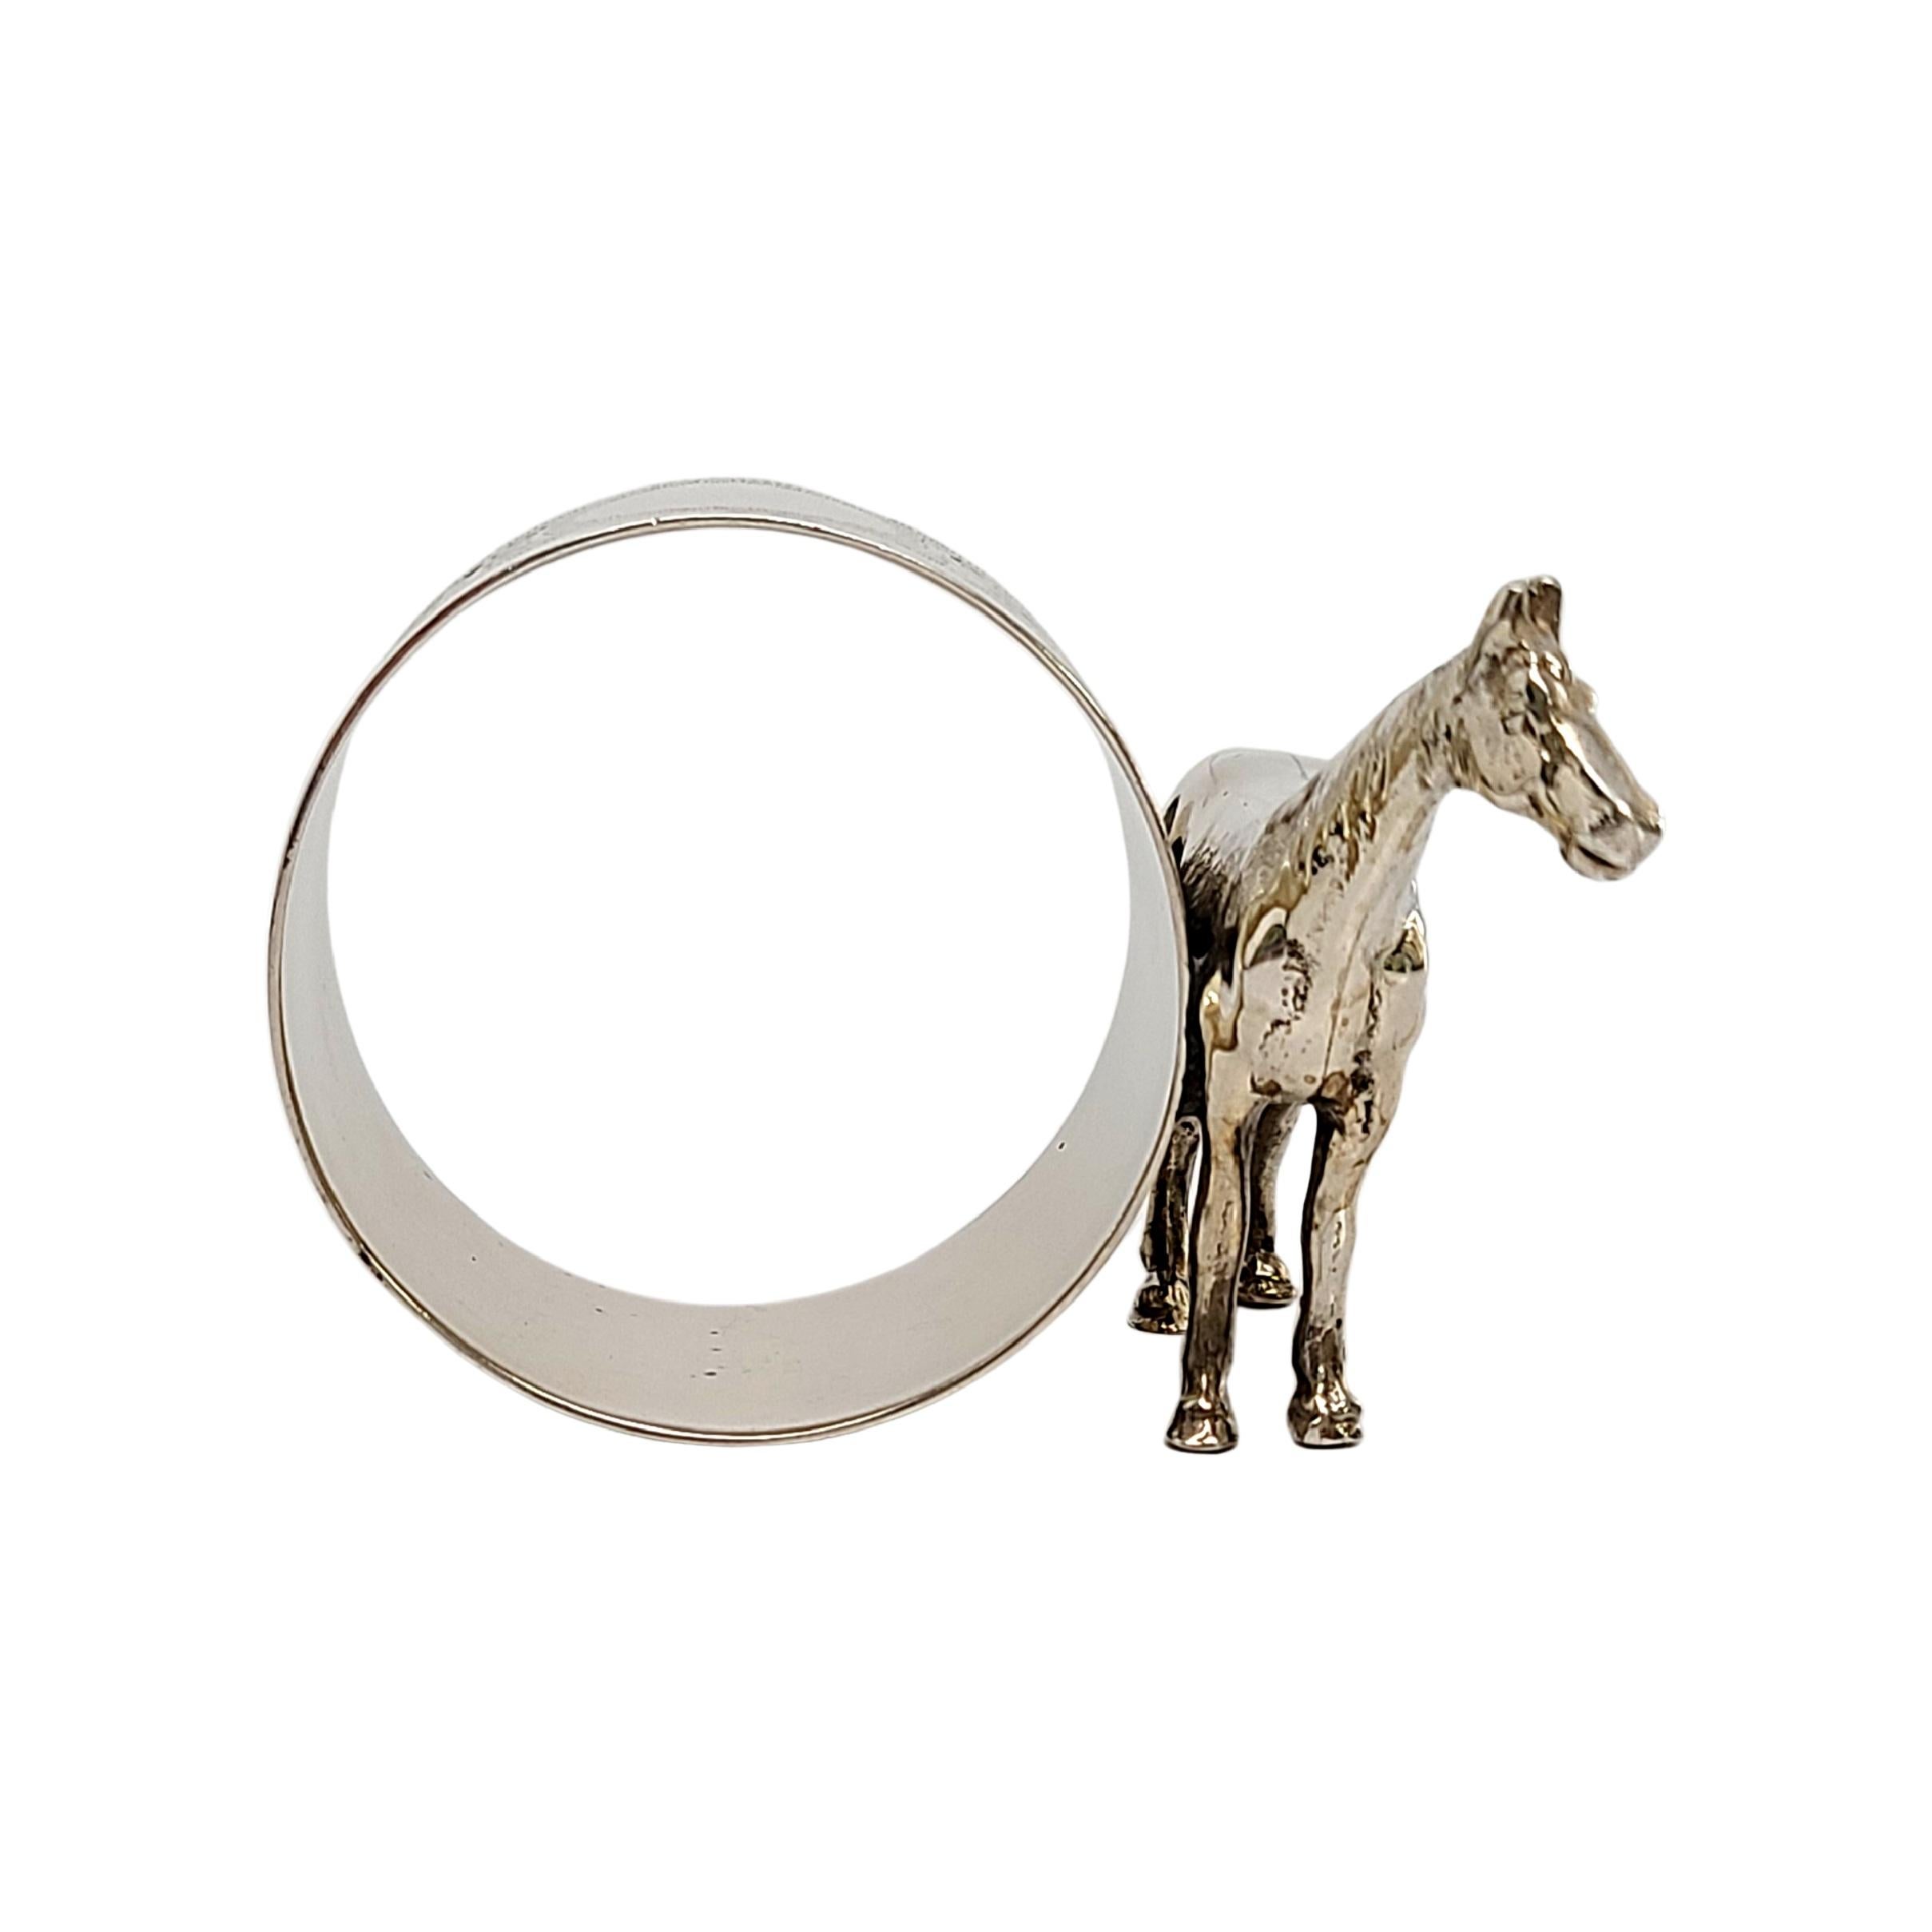 Sterling silver figural horse napkin ring.

No monogram.

Etched floral design around the ring, round framed empty cartouche, perfect for engraving. Large figural horse on one side.

Horse measures 1 5/8